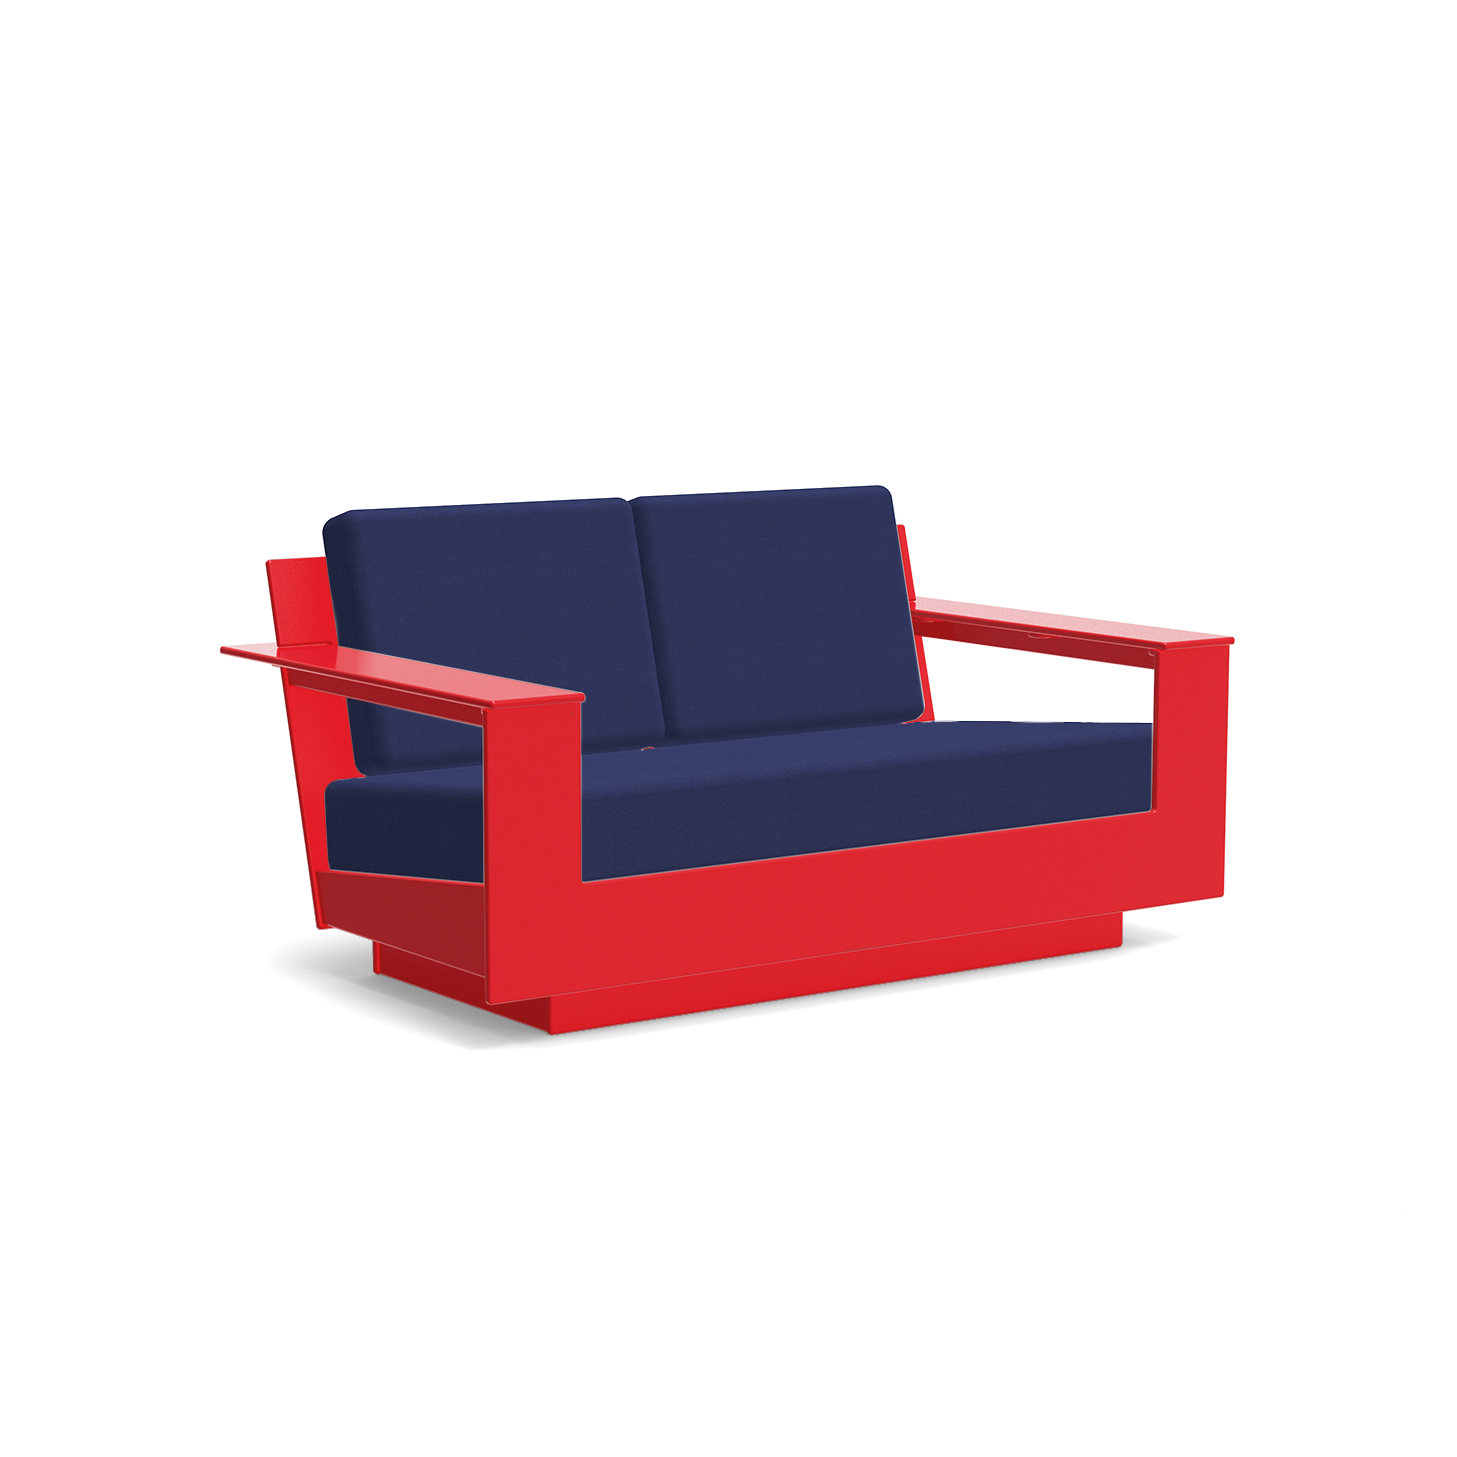 studio shot of nisswa loveseat in apple red with navy cushion